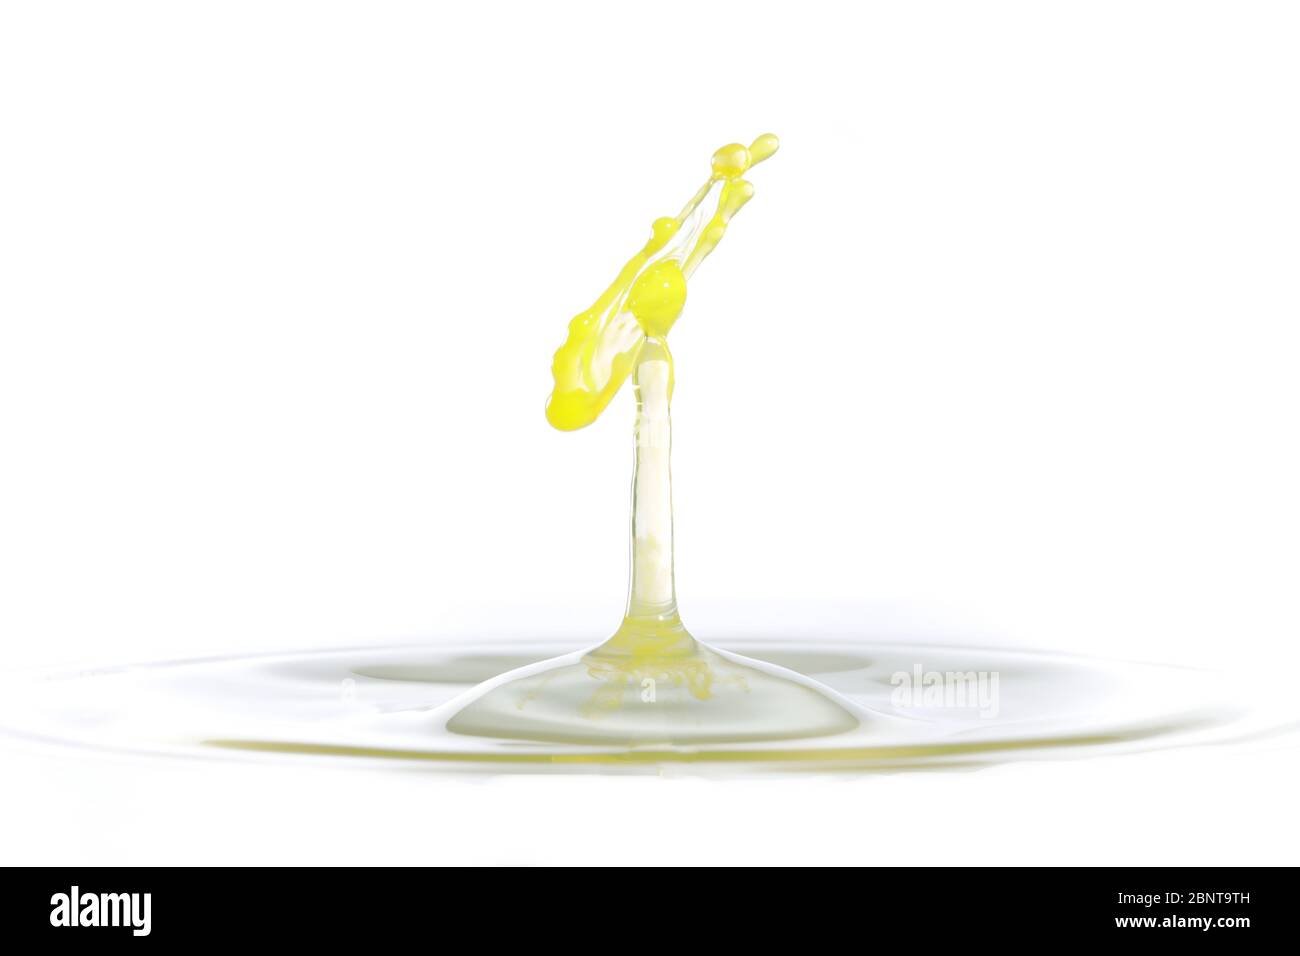 Water Drop Splash against a white background Stock Photo